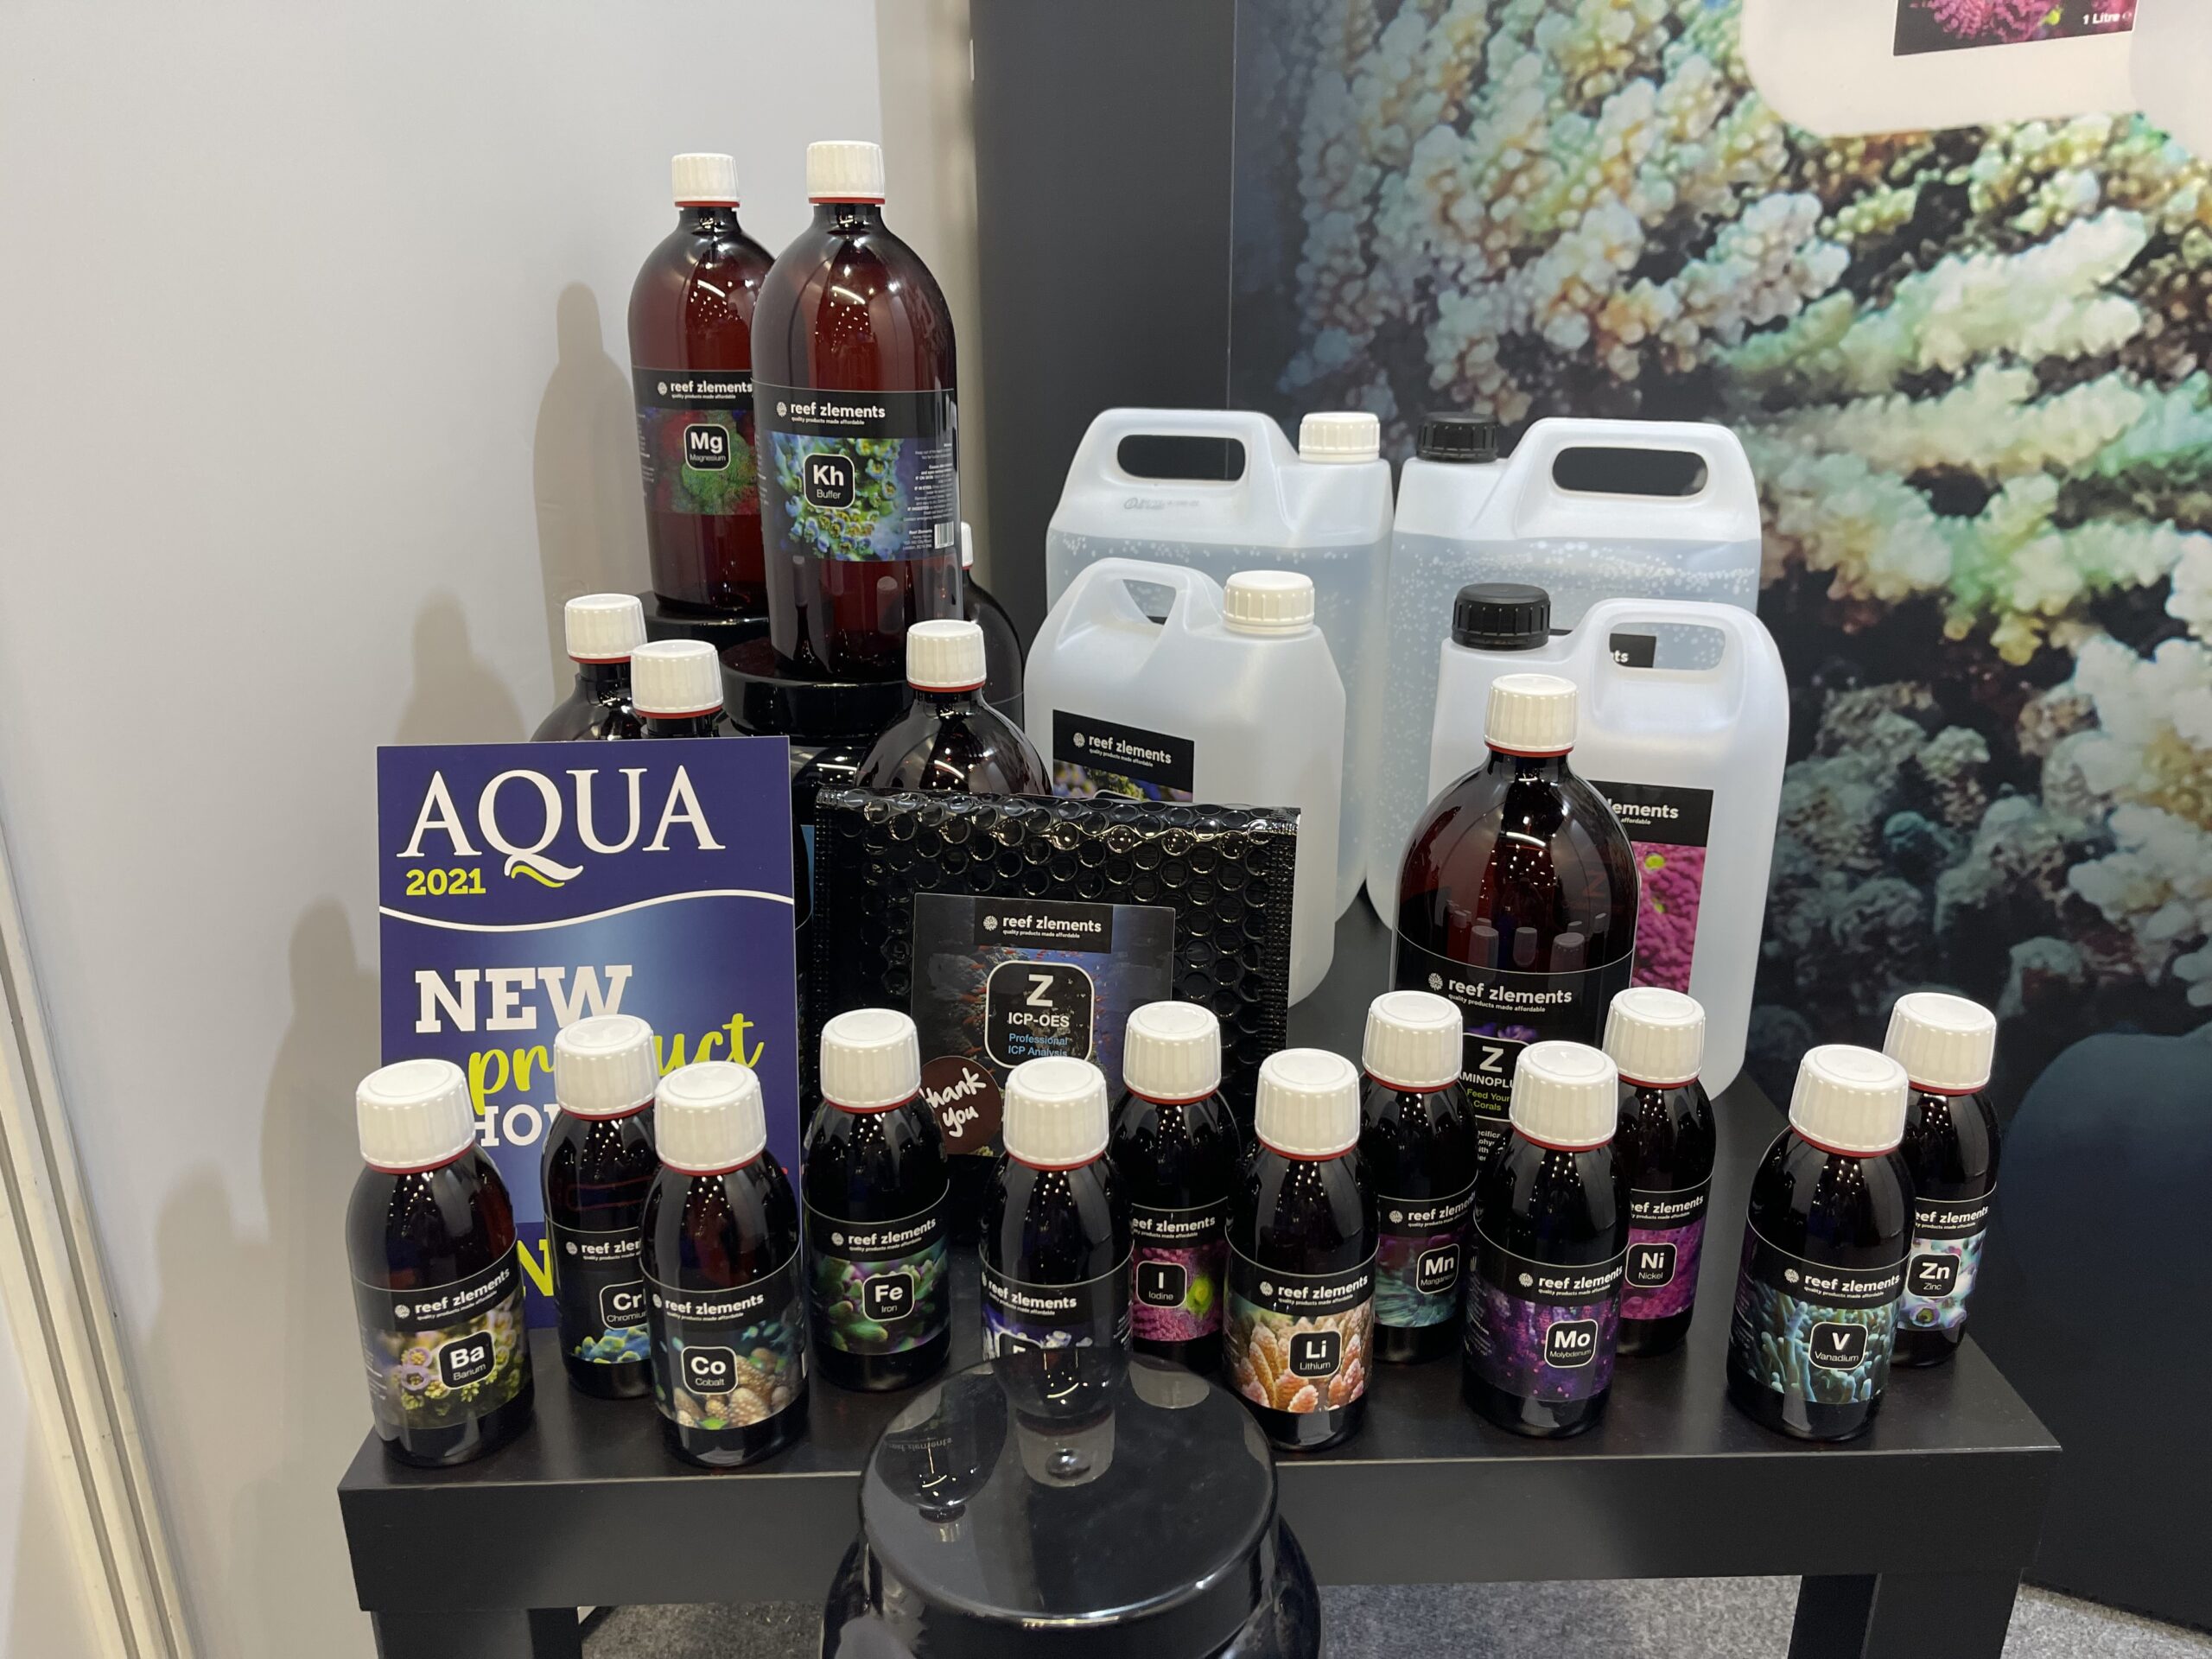 Reef Zlements product range on trade stand 2021